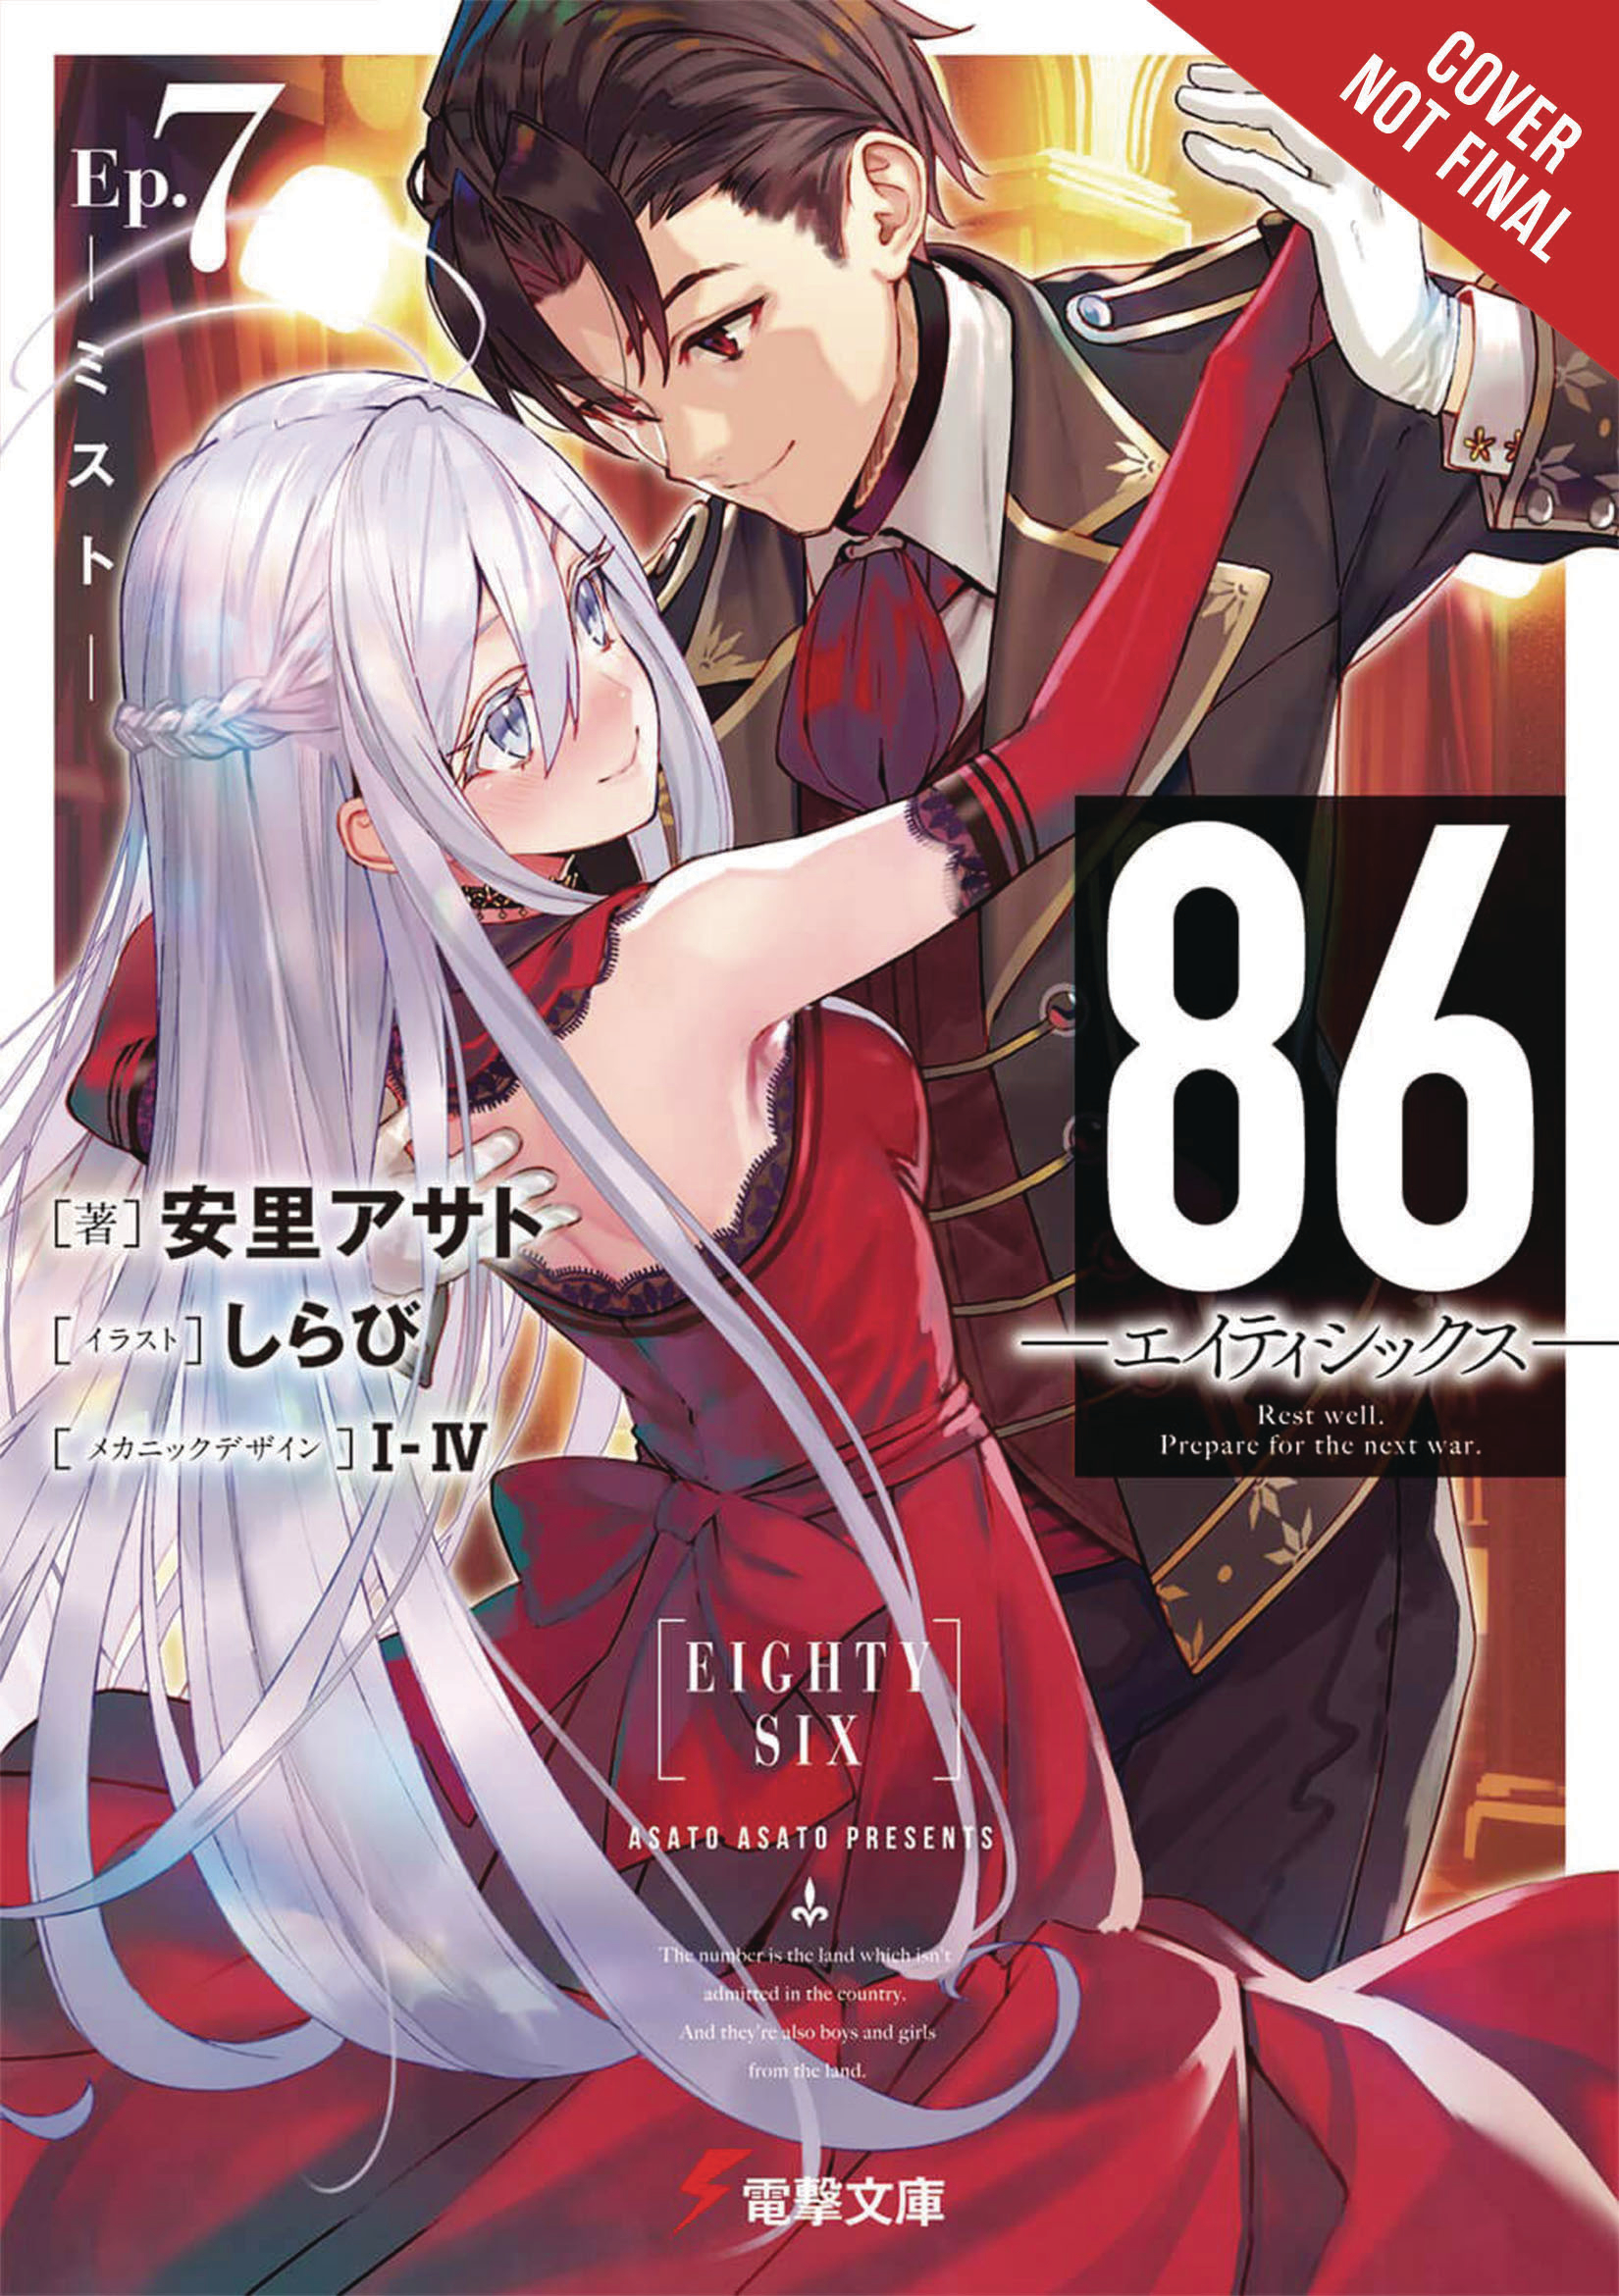 What are the special editions of the light novels and are they